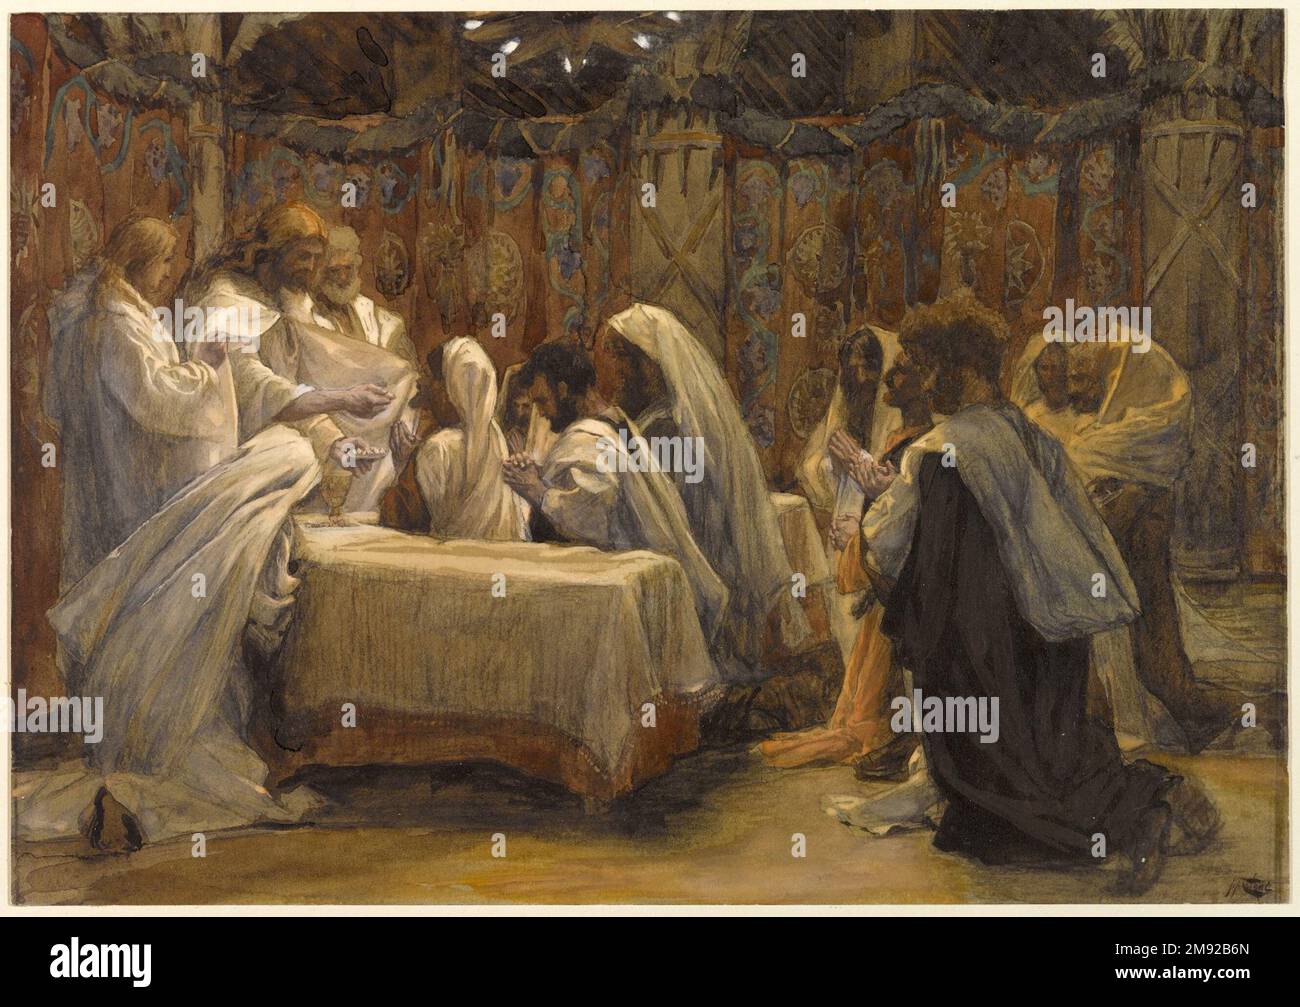 The Communion of the Apostles (La communion des apôtres) James Tissot (French, 1836-1902). The Communion of the Apostles (La communion des apôtres), 1886-1894. Opaque watercolor over graphite on gray wove paper, Image: 9 7/16 x 13 1/2 in. (24 x 34.3 cm).  Establishing the sacrament of Communion—in which the bread and wine of the Passover feast come to symbolize the body and blood of Christ—Jesus himself distributes the bread to each disciple, suggesting the intimacy each of them shared with him at this solemn moment. For the artist, this event marked not only the apostles’ liturgical initiatio Stock Photo